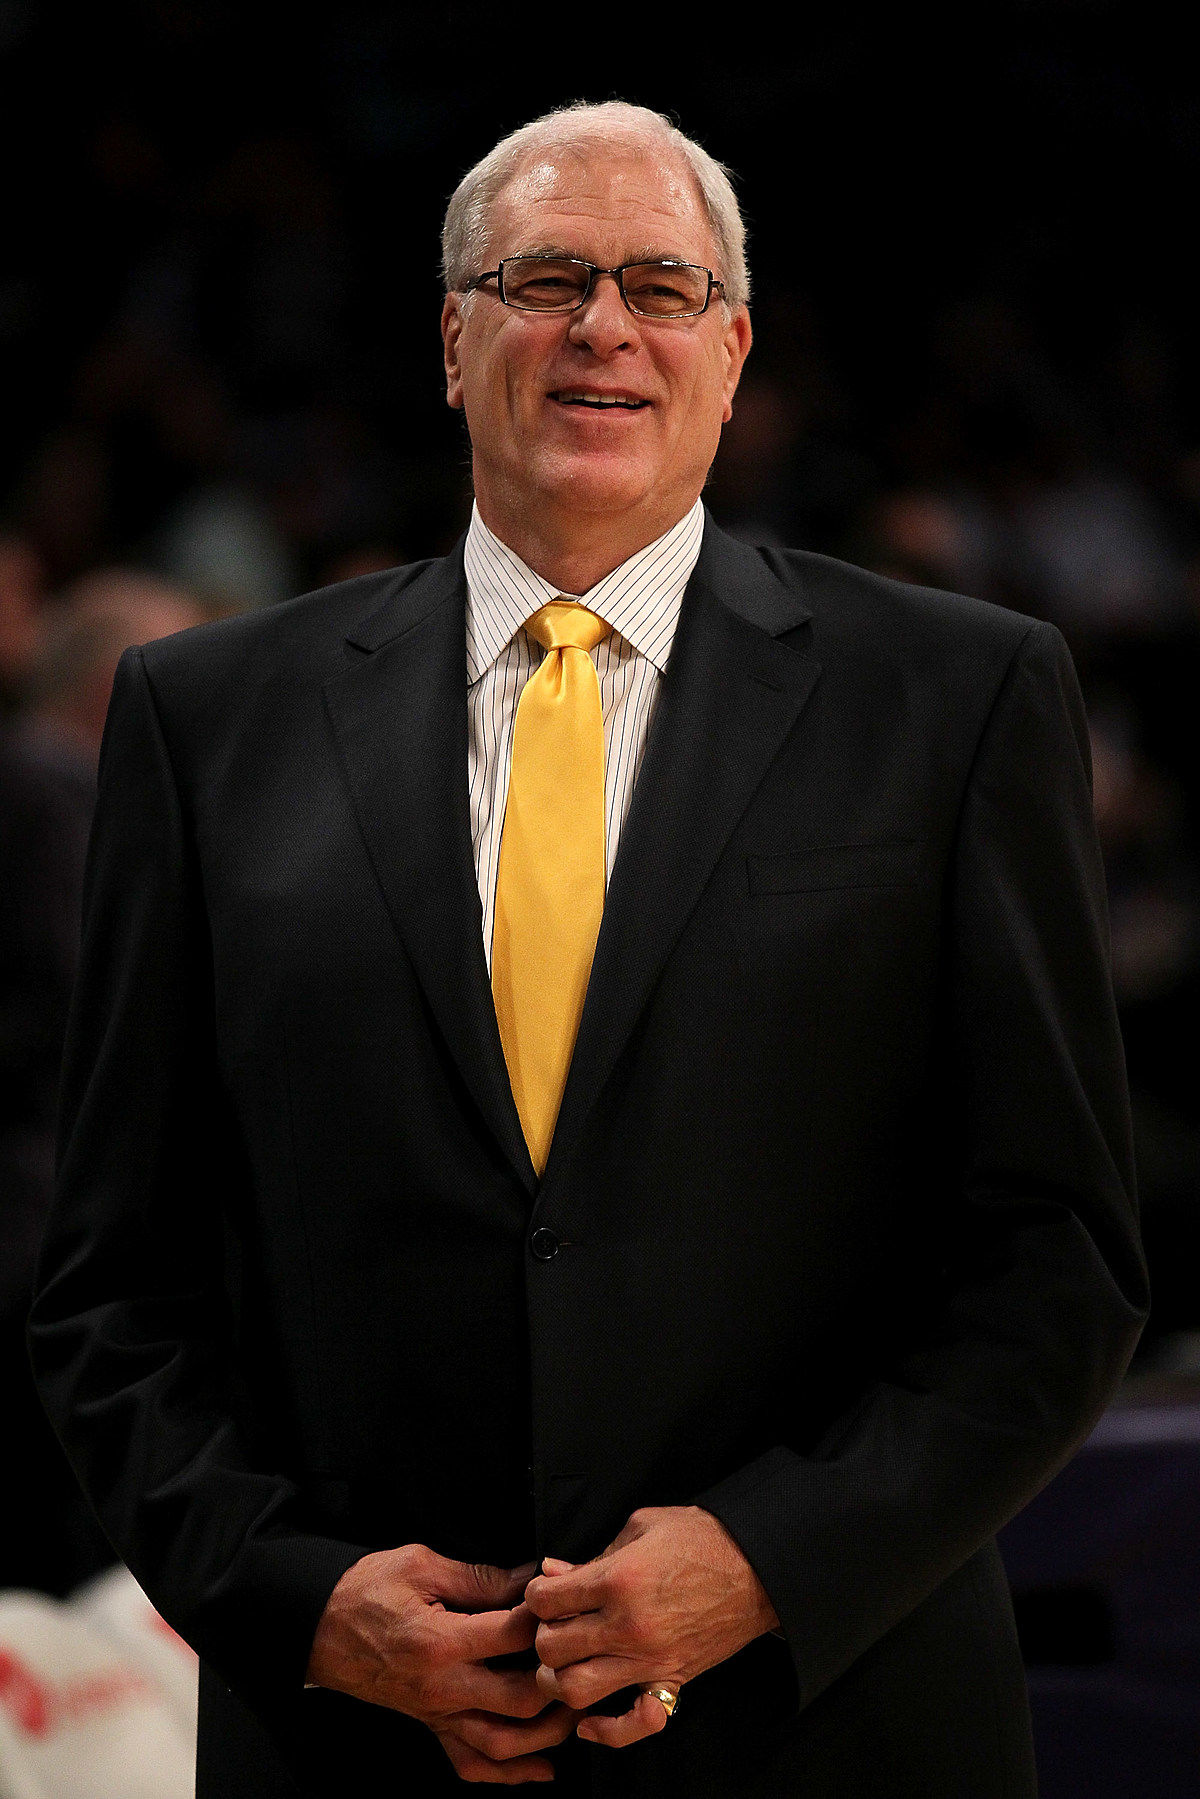 Zenmaster Phil Jackson Might be Traveling into the Twilight Zone